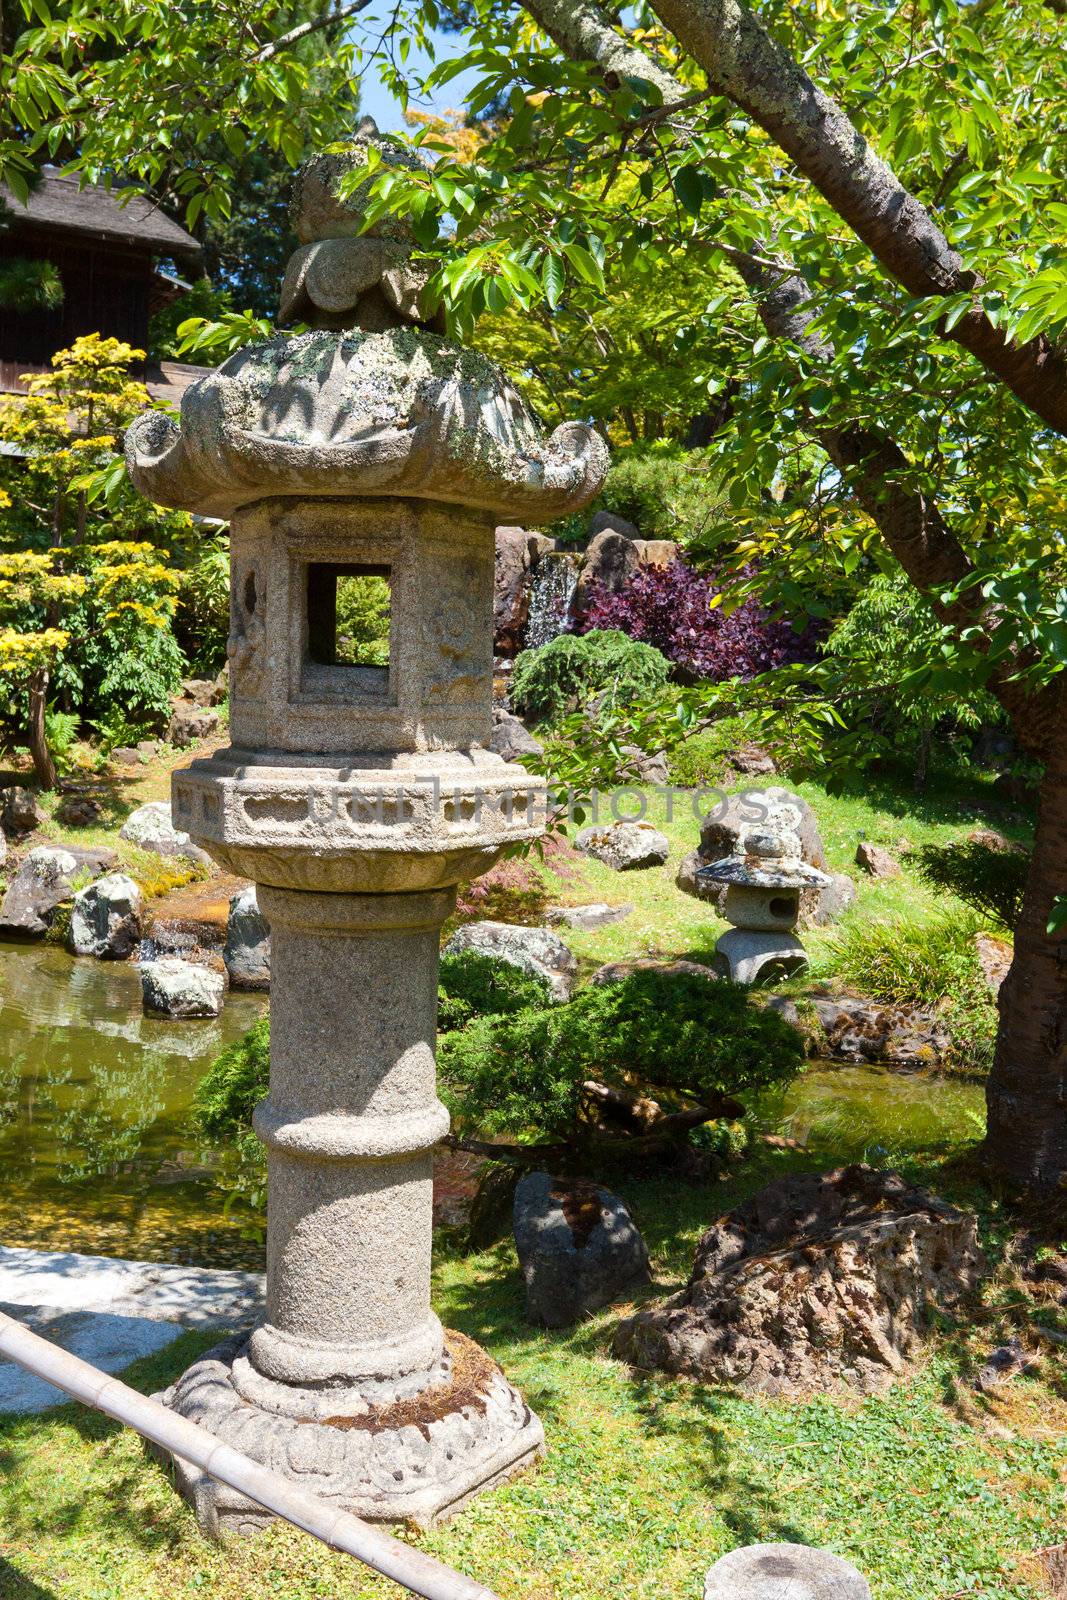 A Japanese tea garden is lush and peaceful in San Francisco.